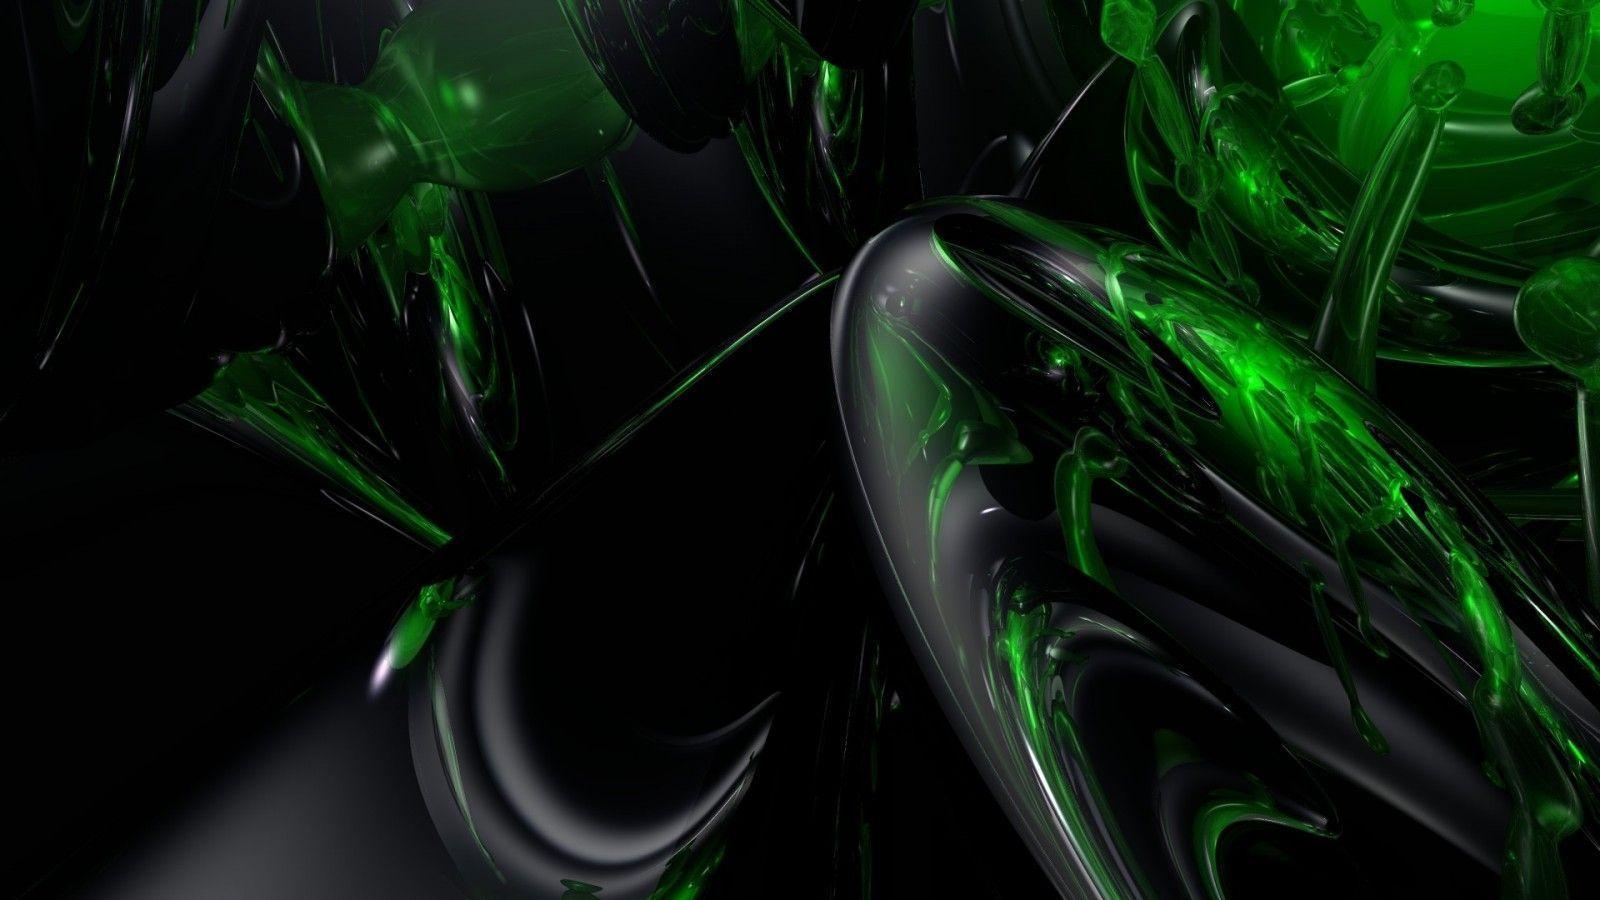 Black And Green Abstract Wallpaper 3218 HD Wallpaper in Abstract